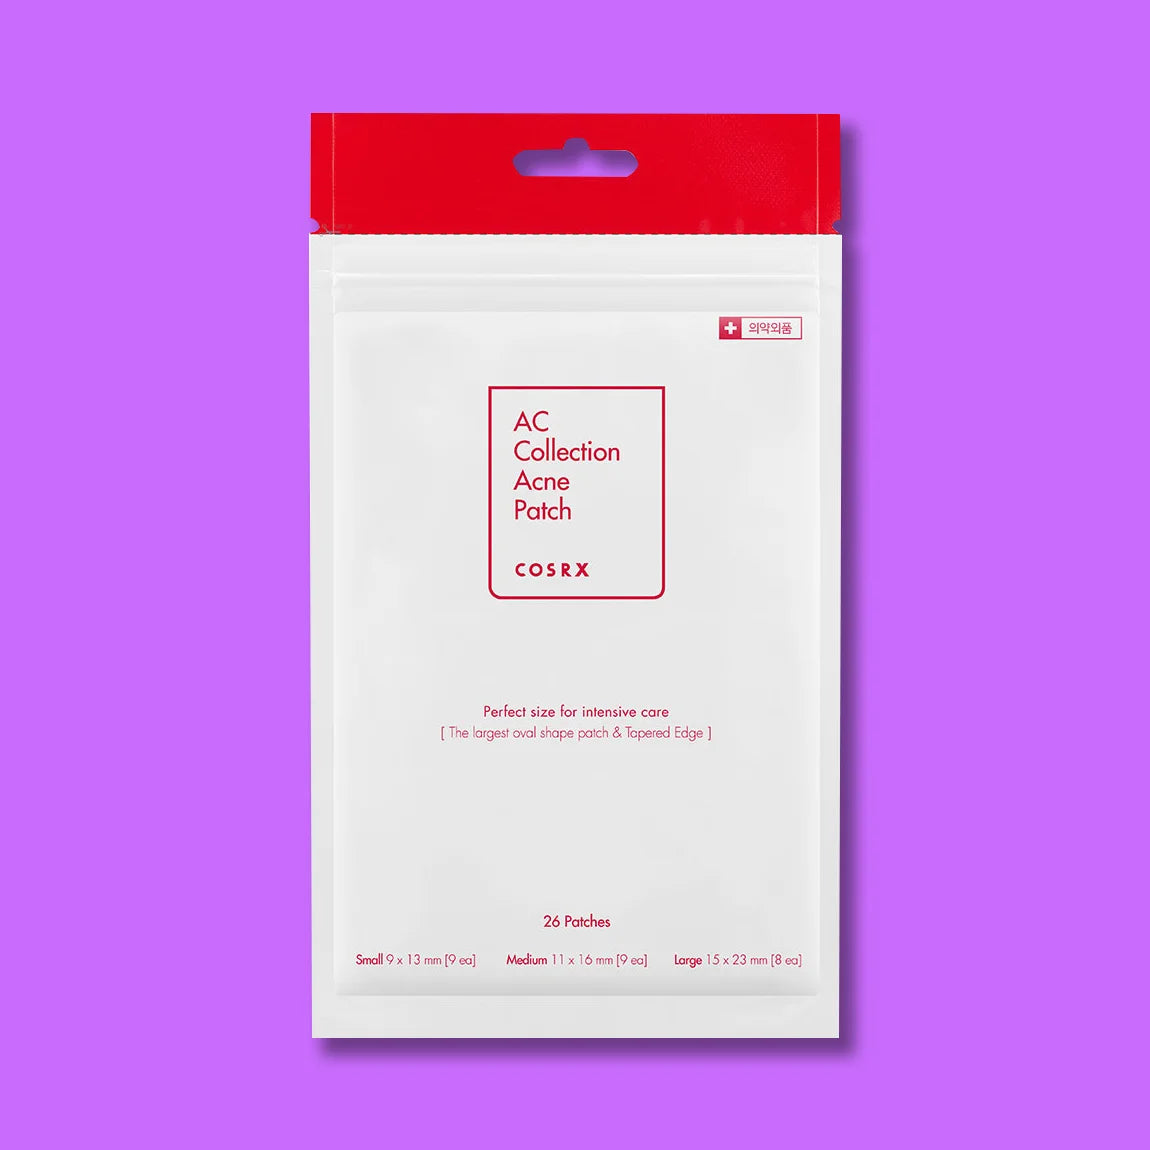 Cosrx AC Collection Acne Patch best selling pimple patch Korean asian stickers how to cover pimple solution K Beauty World